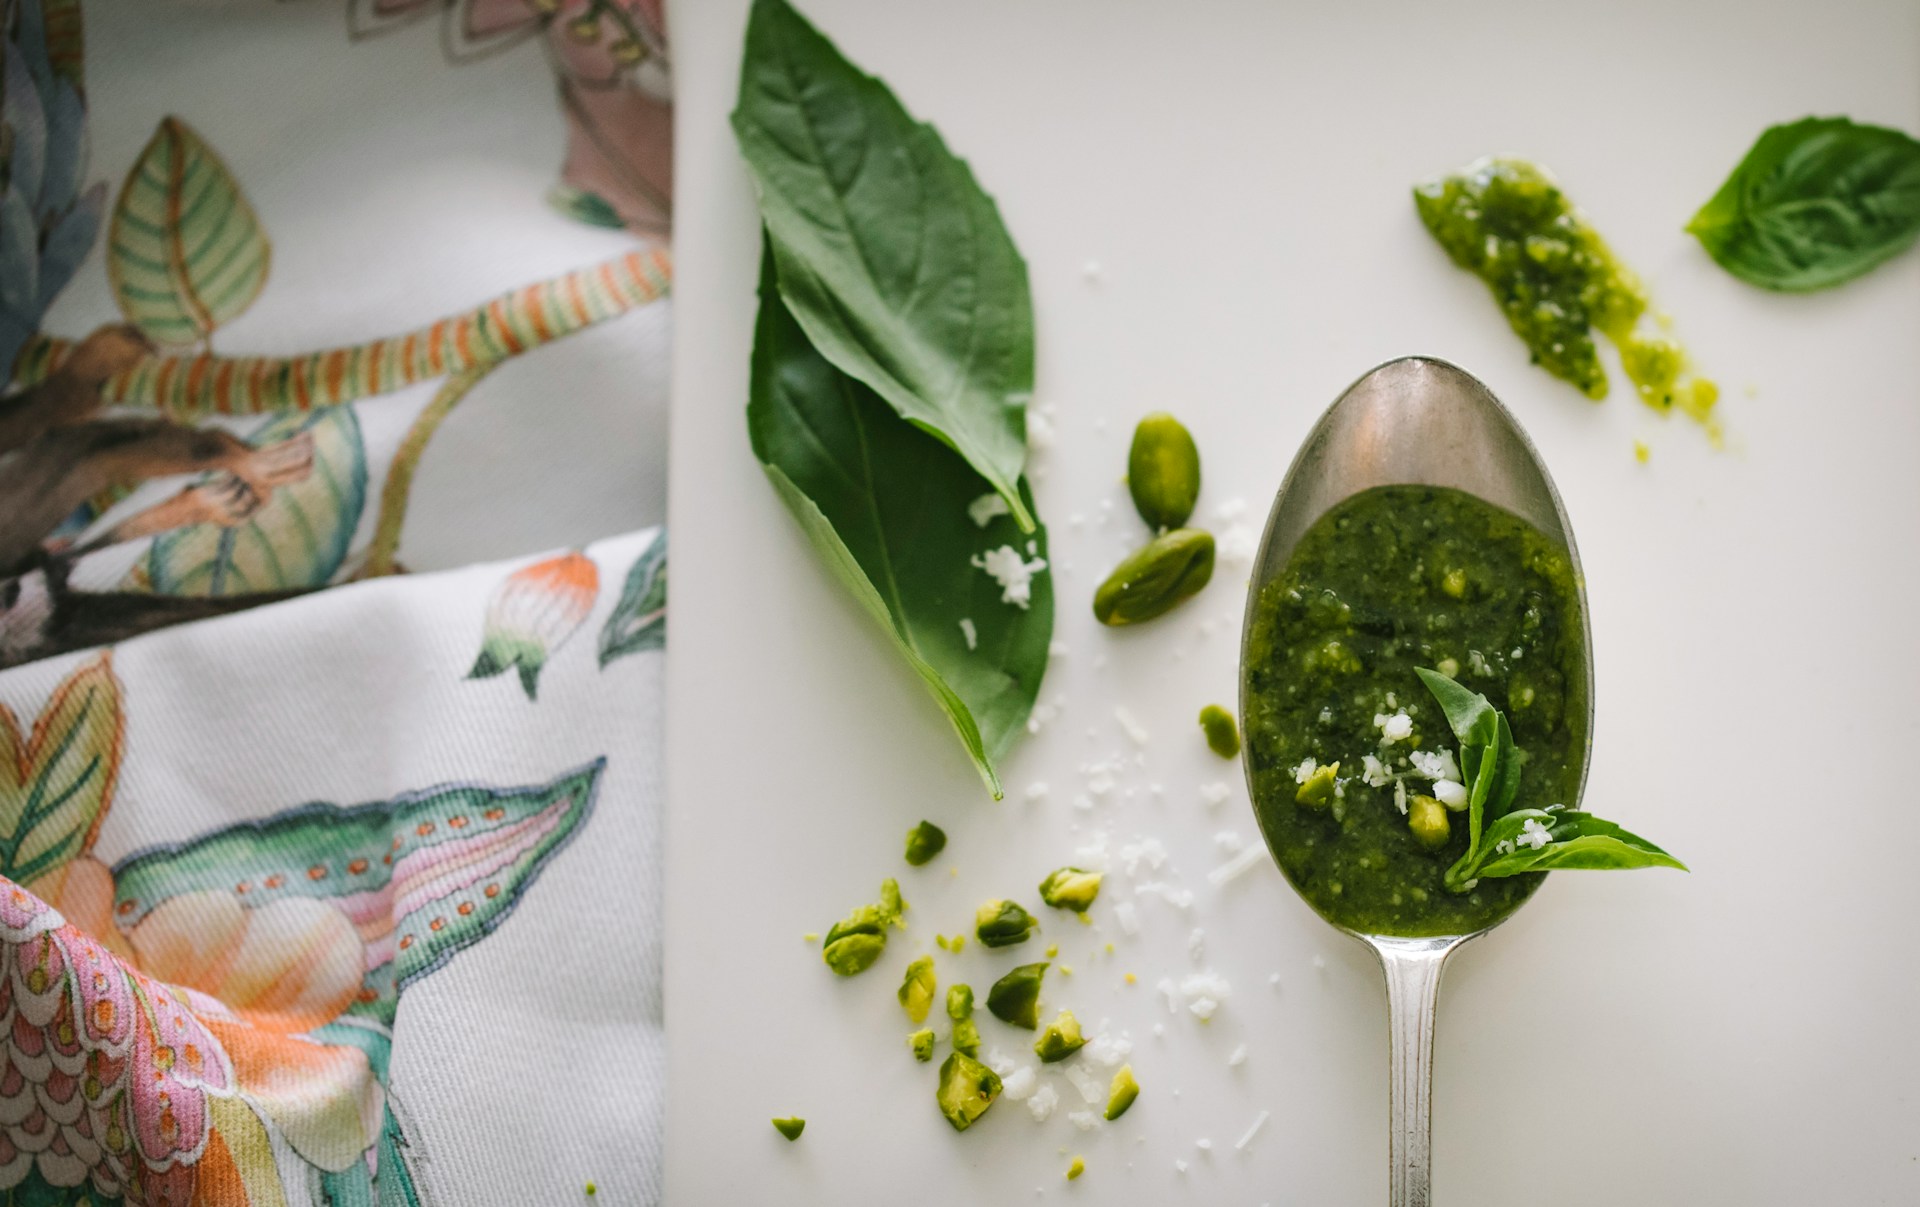 Flatlay of pesto ingredients: basil leaves, pistachios, cheese, and a spoonful of pesto against a fabric background.